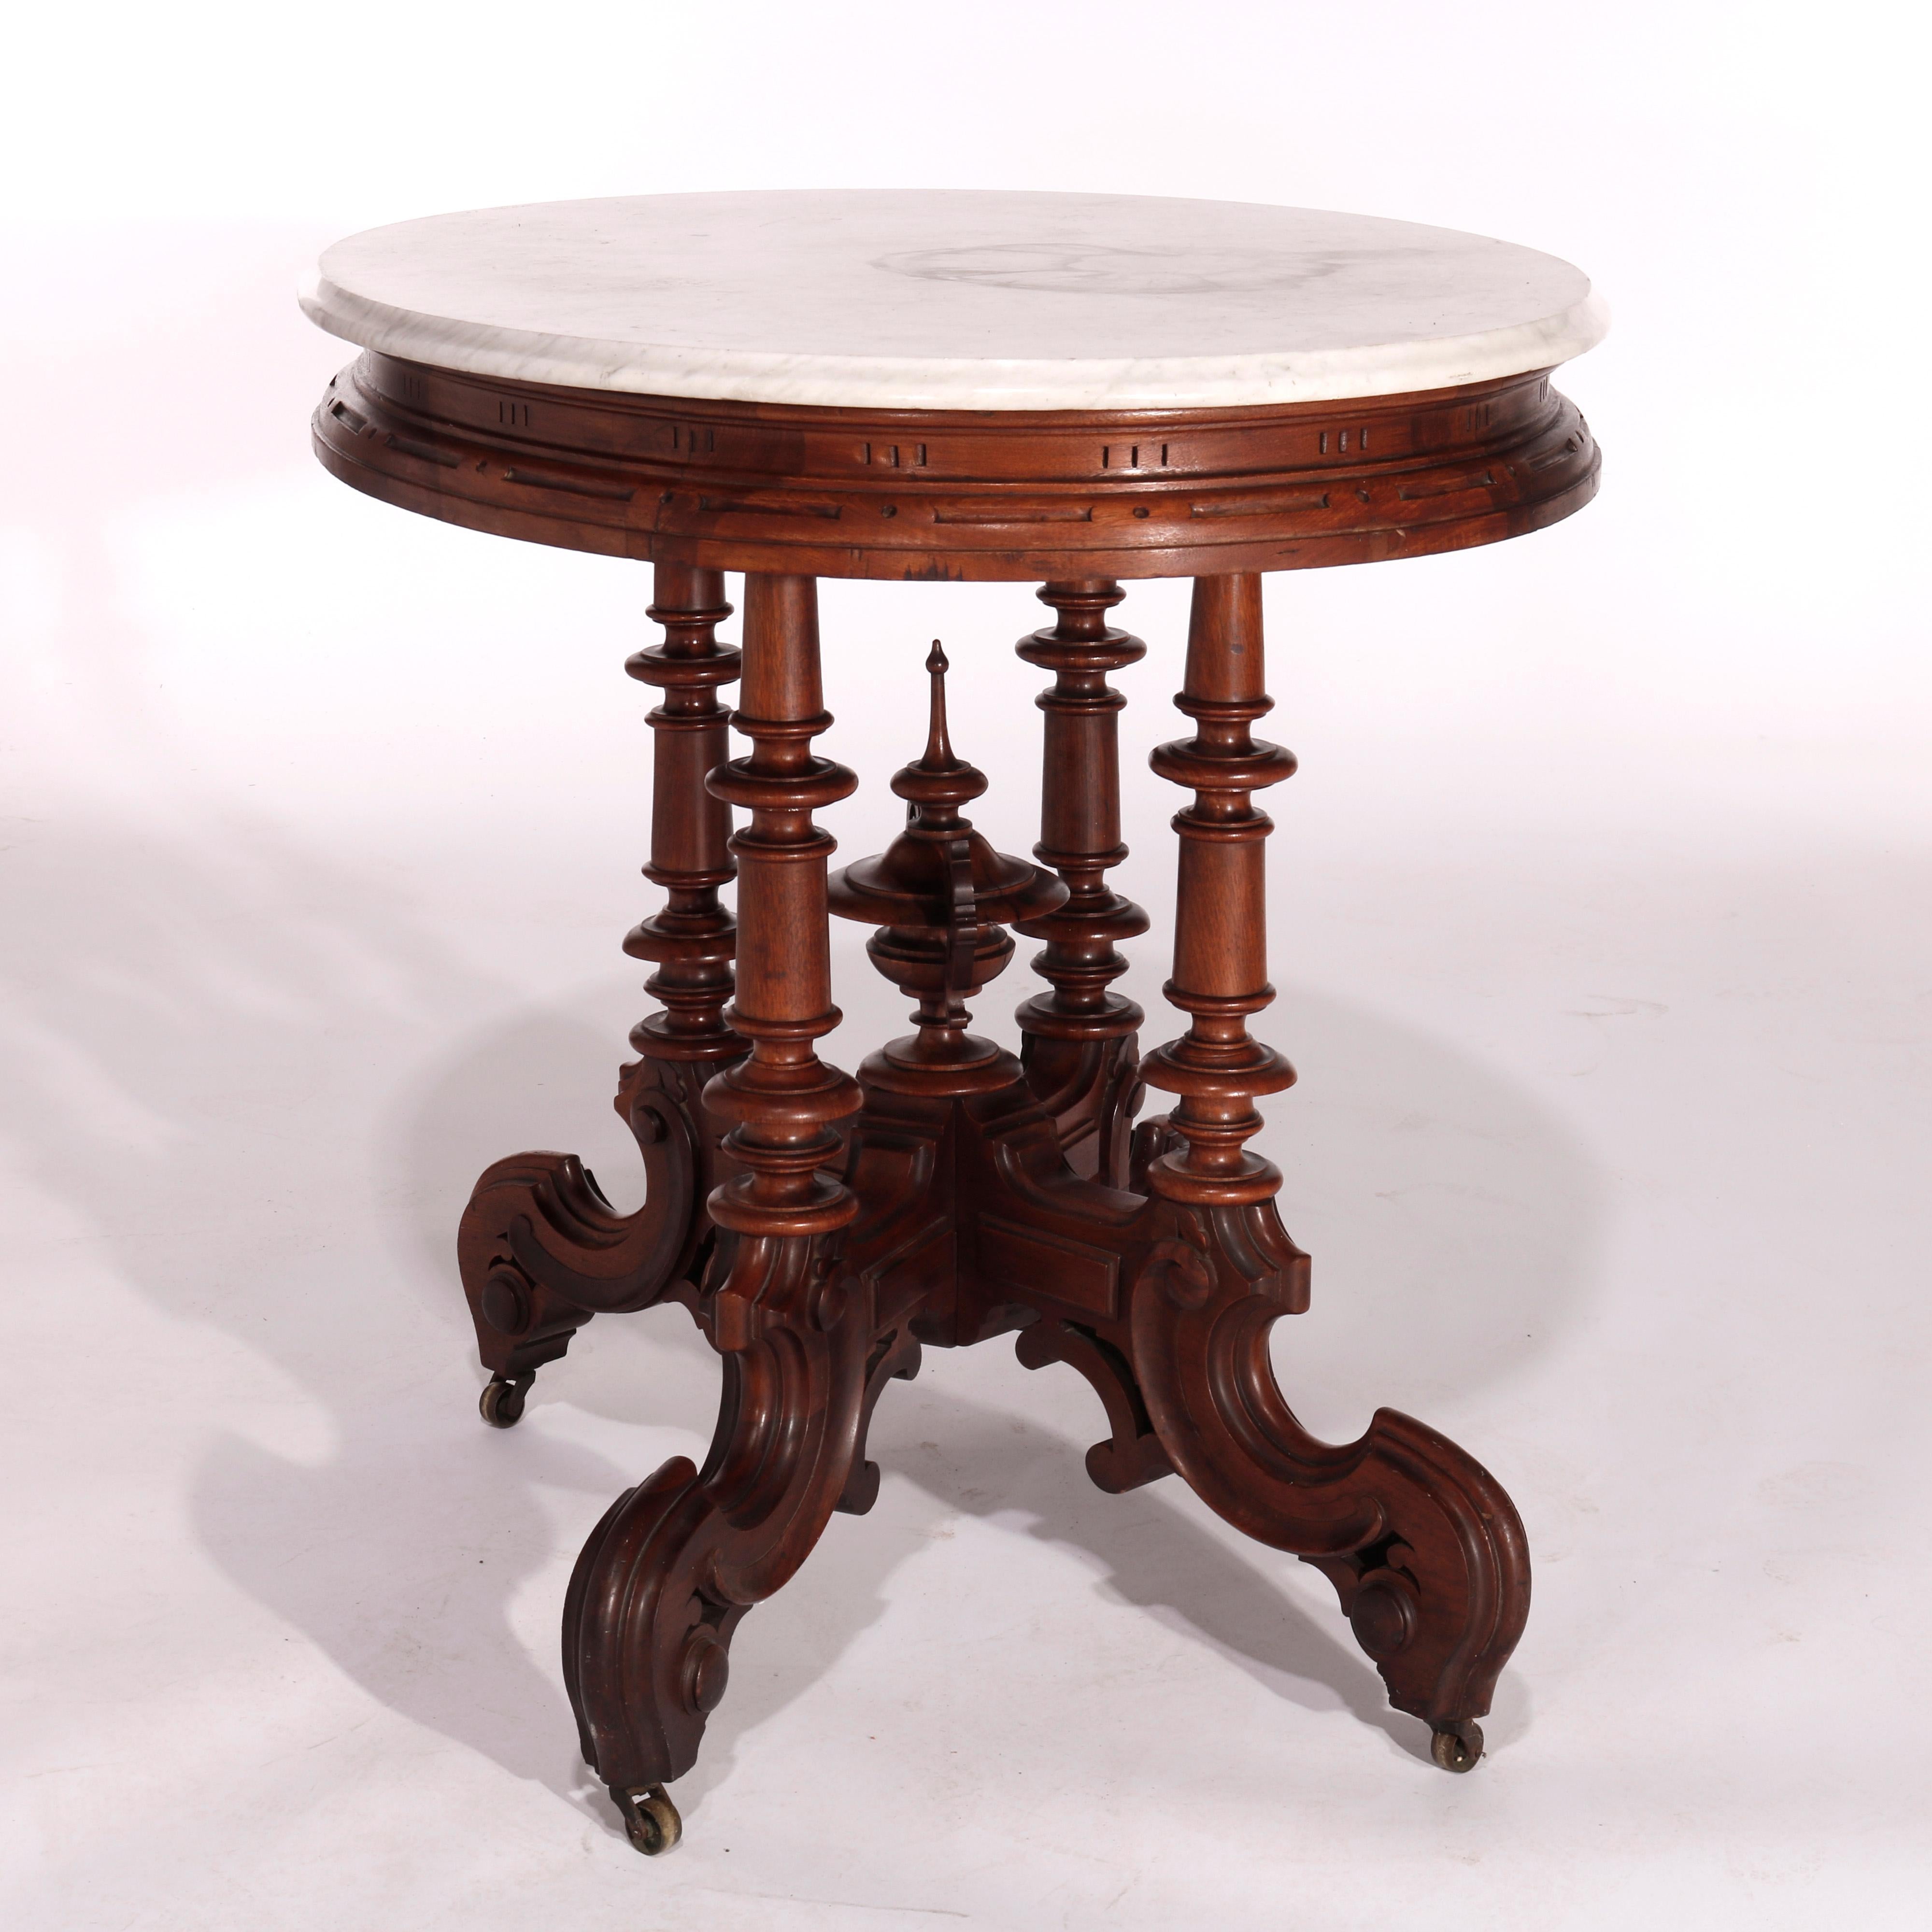 Antique Victorian Brooks Brothers Walnut & Marble Parlor Table, circa 1890 For Sale 6